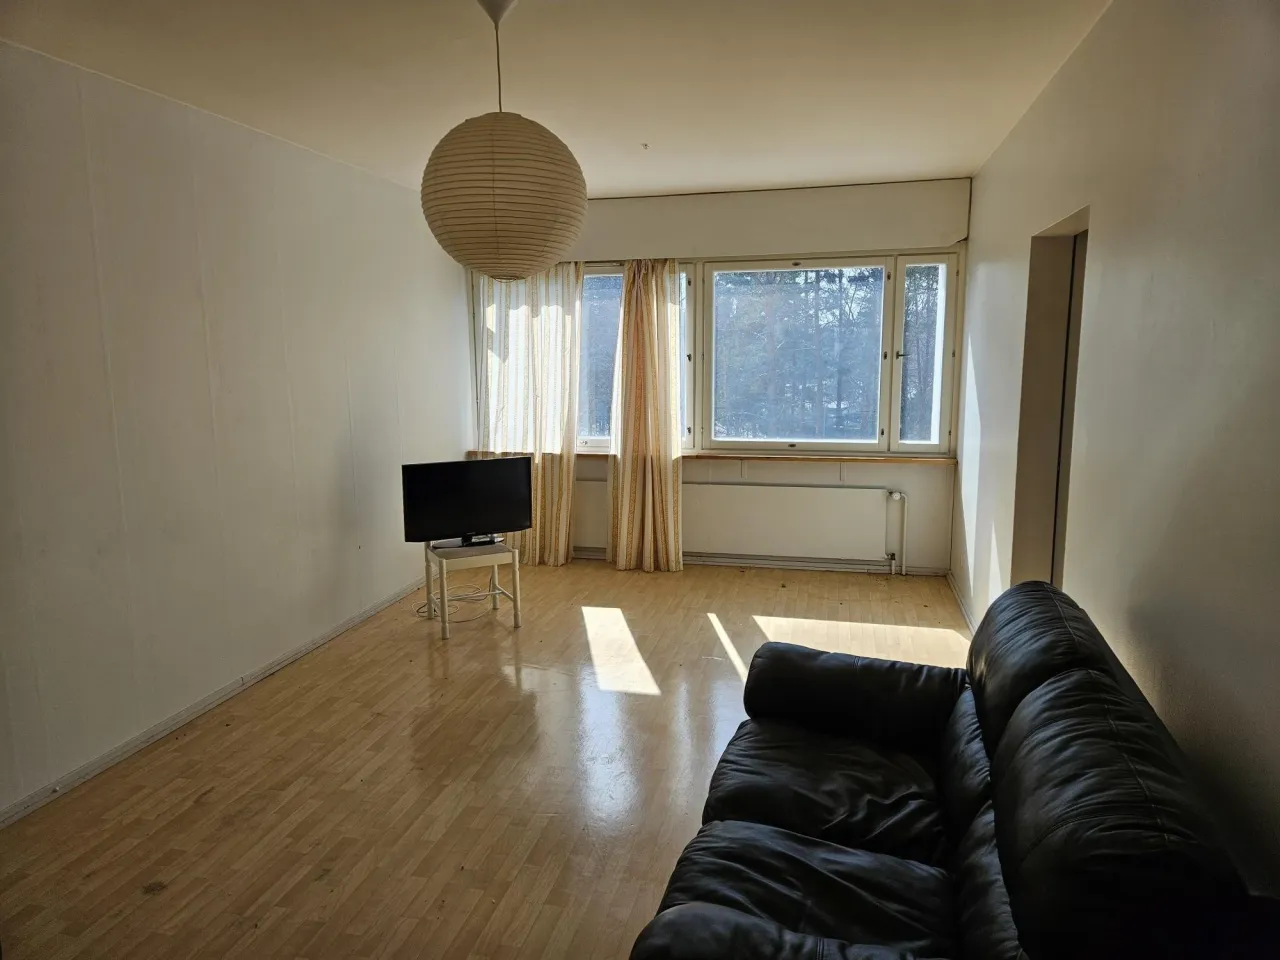 Flat in Kotka, Finland, 70.5 sq.m - picture 1